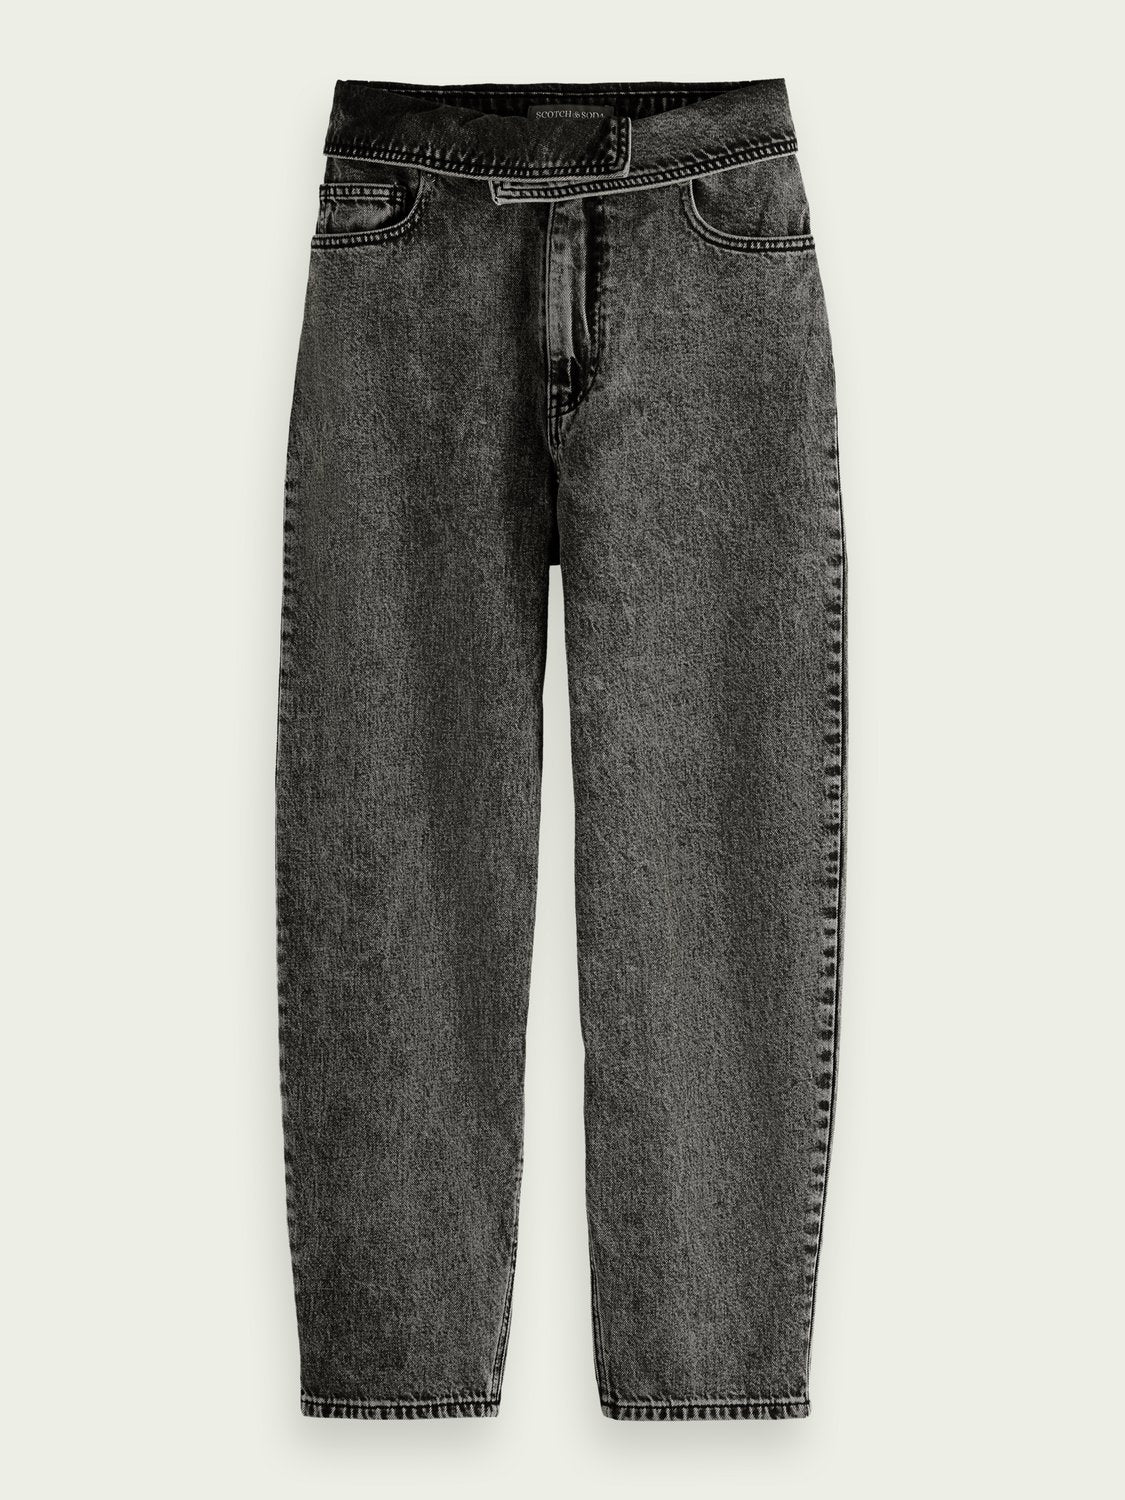 Selected bootcut jean in washed black